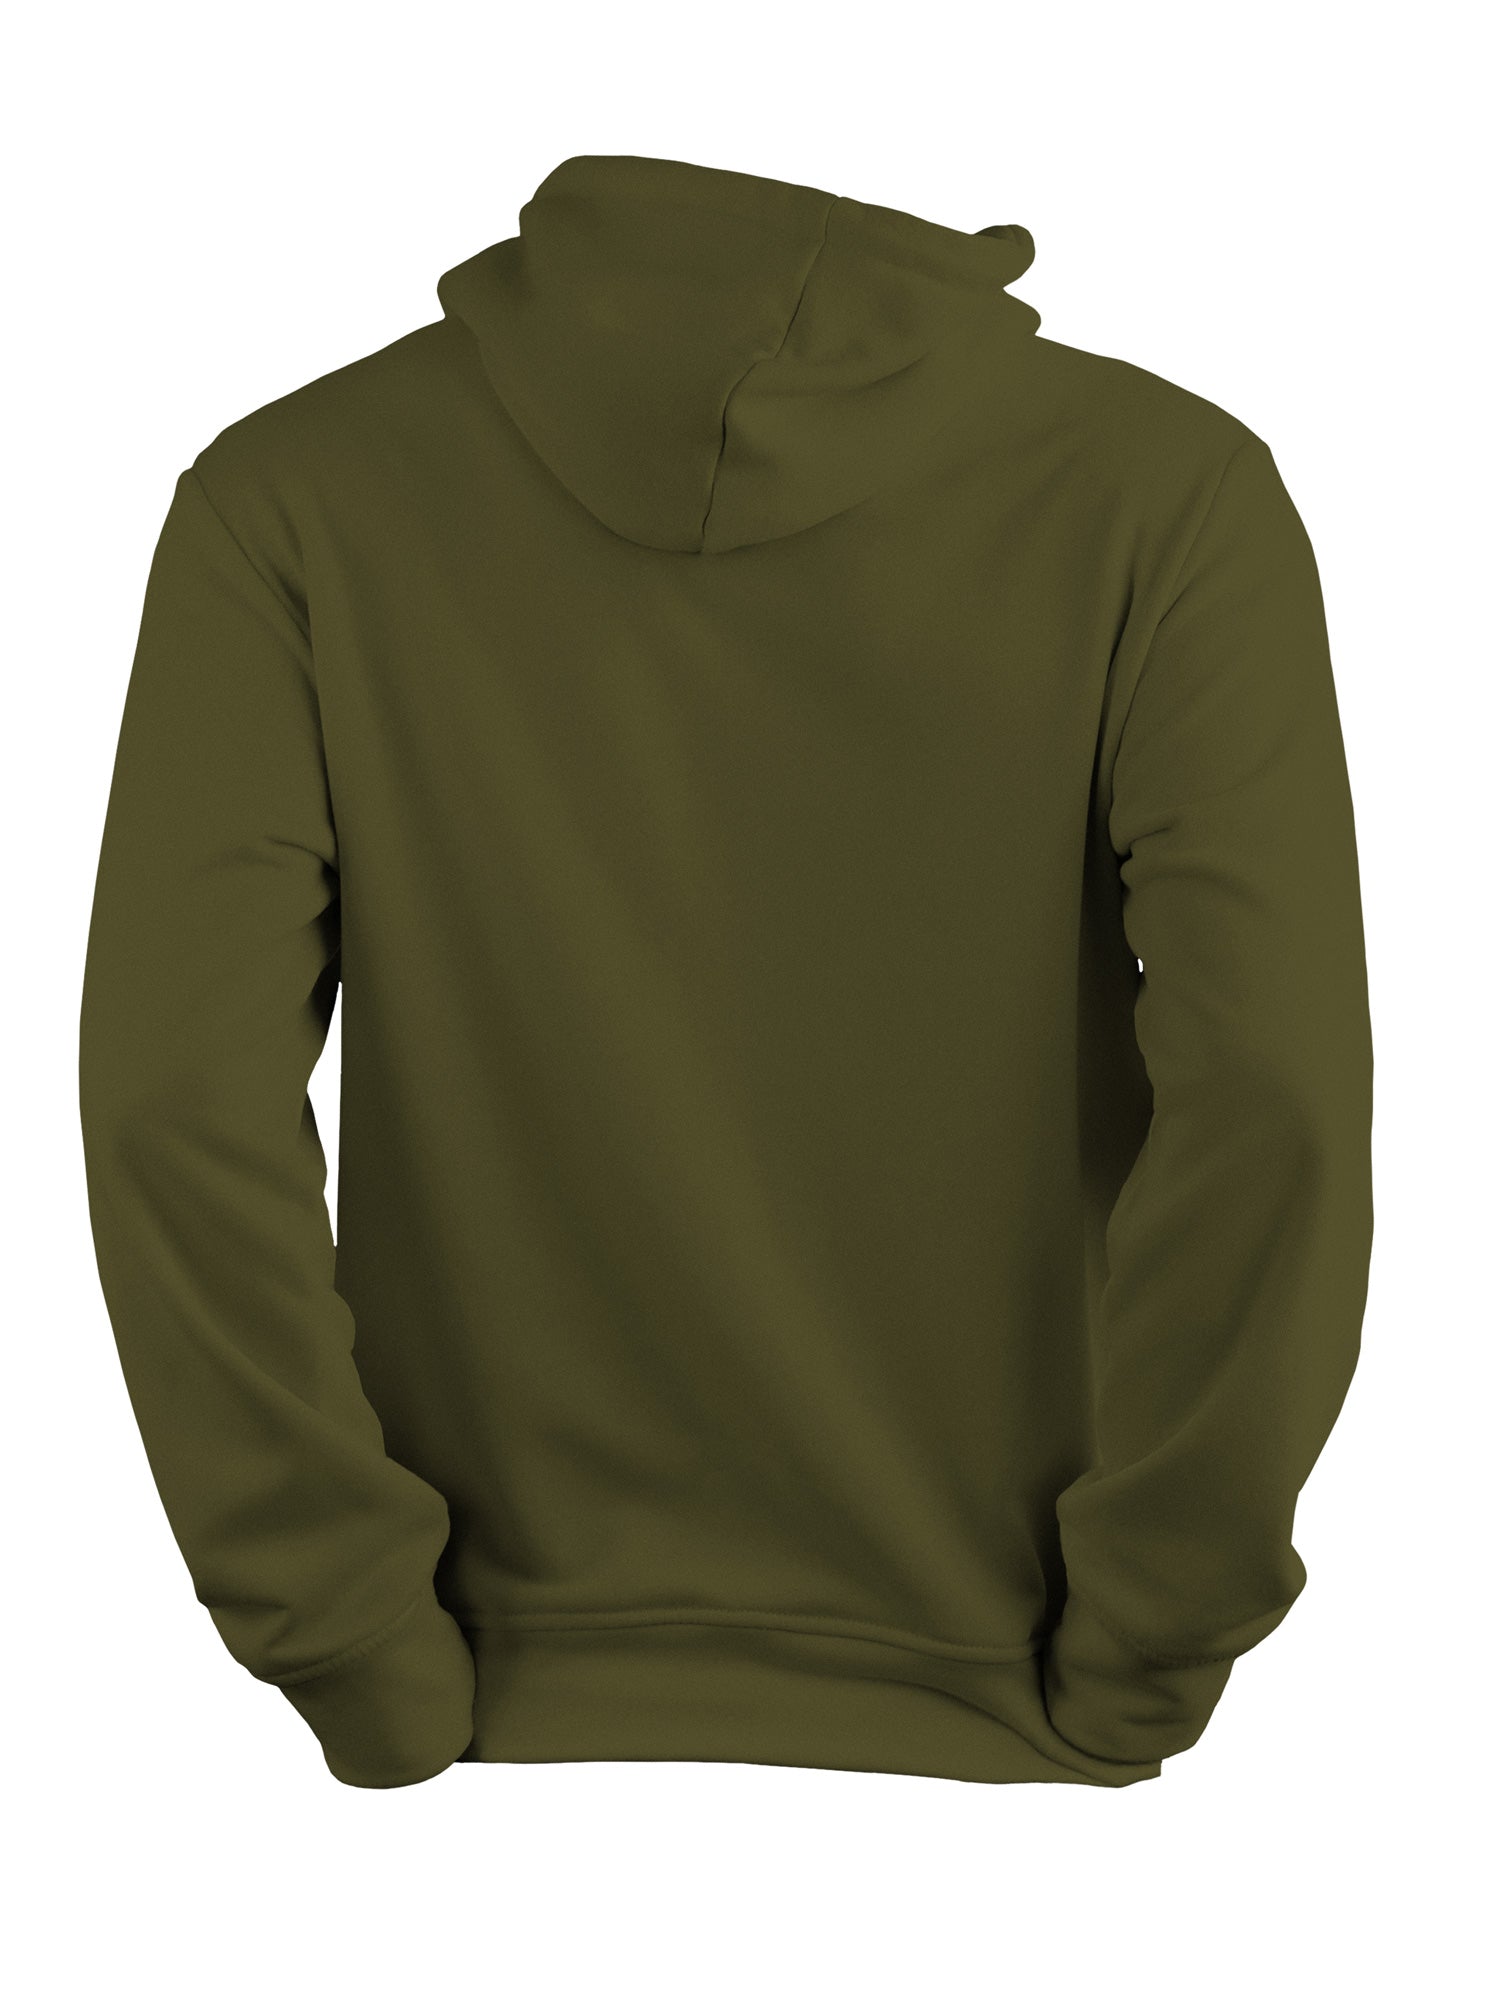 Fly Fishing Hoodie | Original Fly - Capsize Fly Fishing